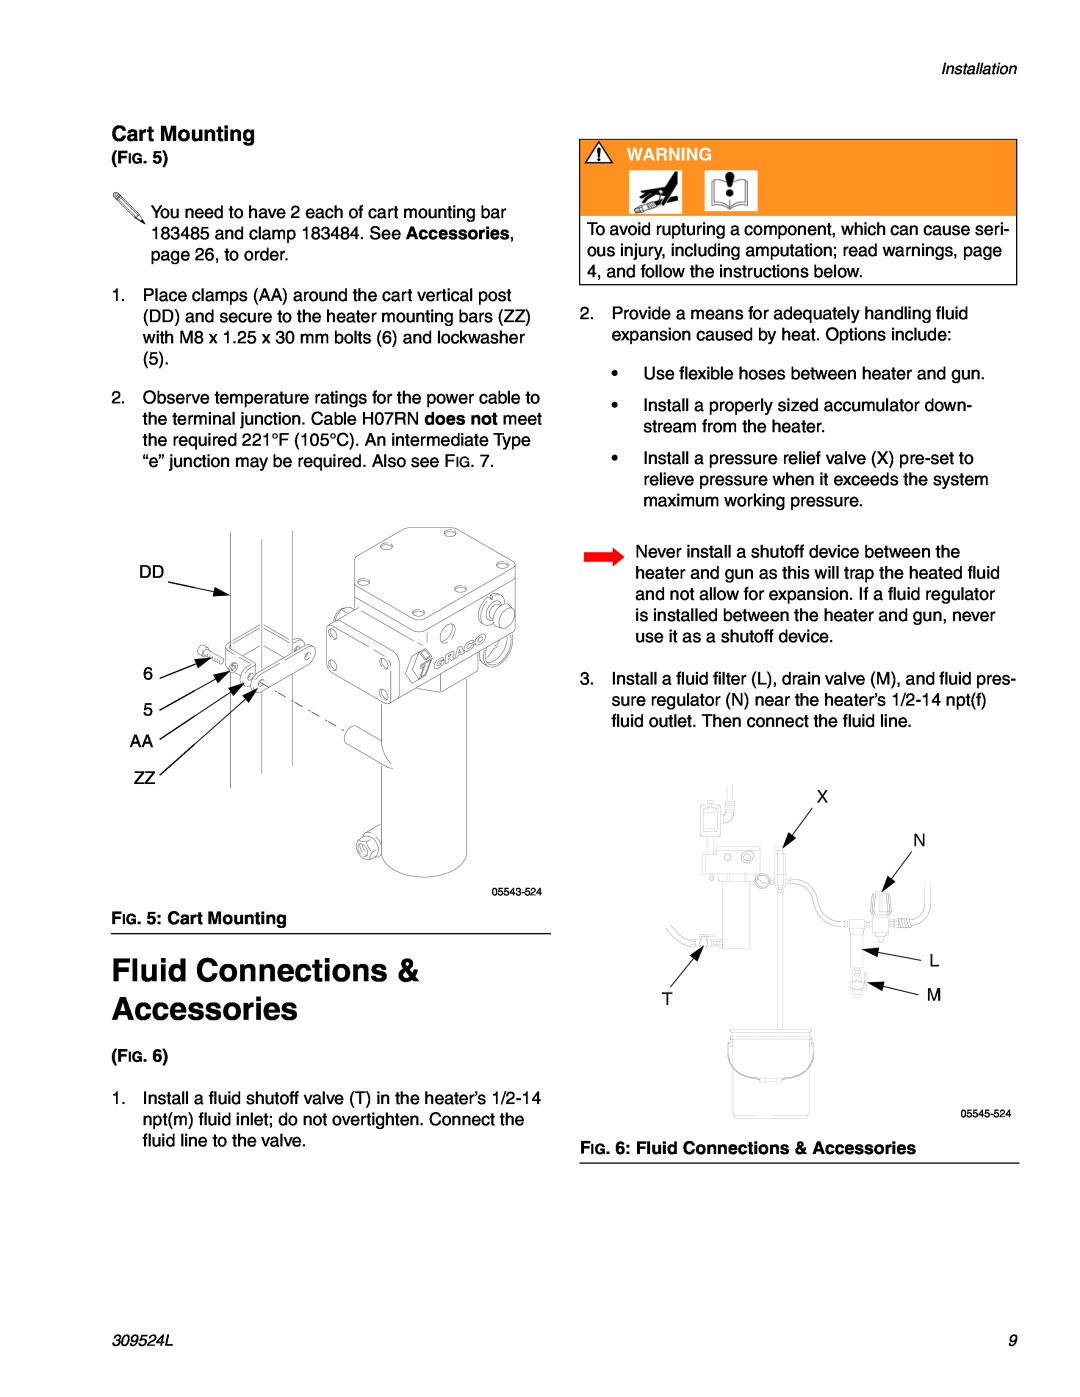 Graco 309524L important safety instructions Fluid Connections & Accessories, Cart Mounting 